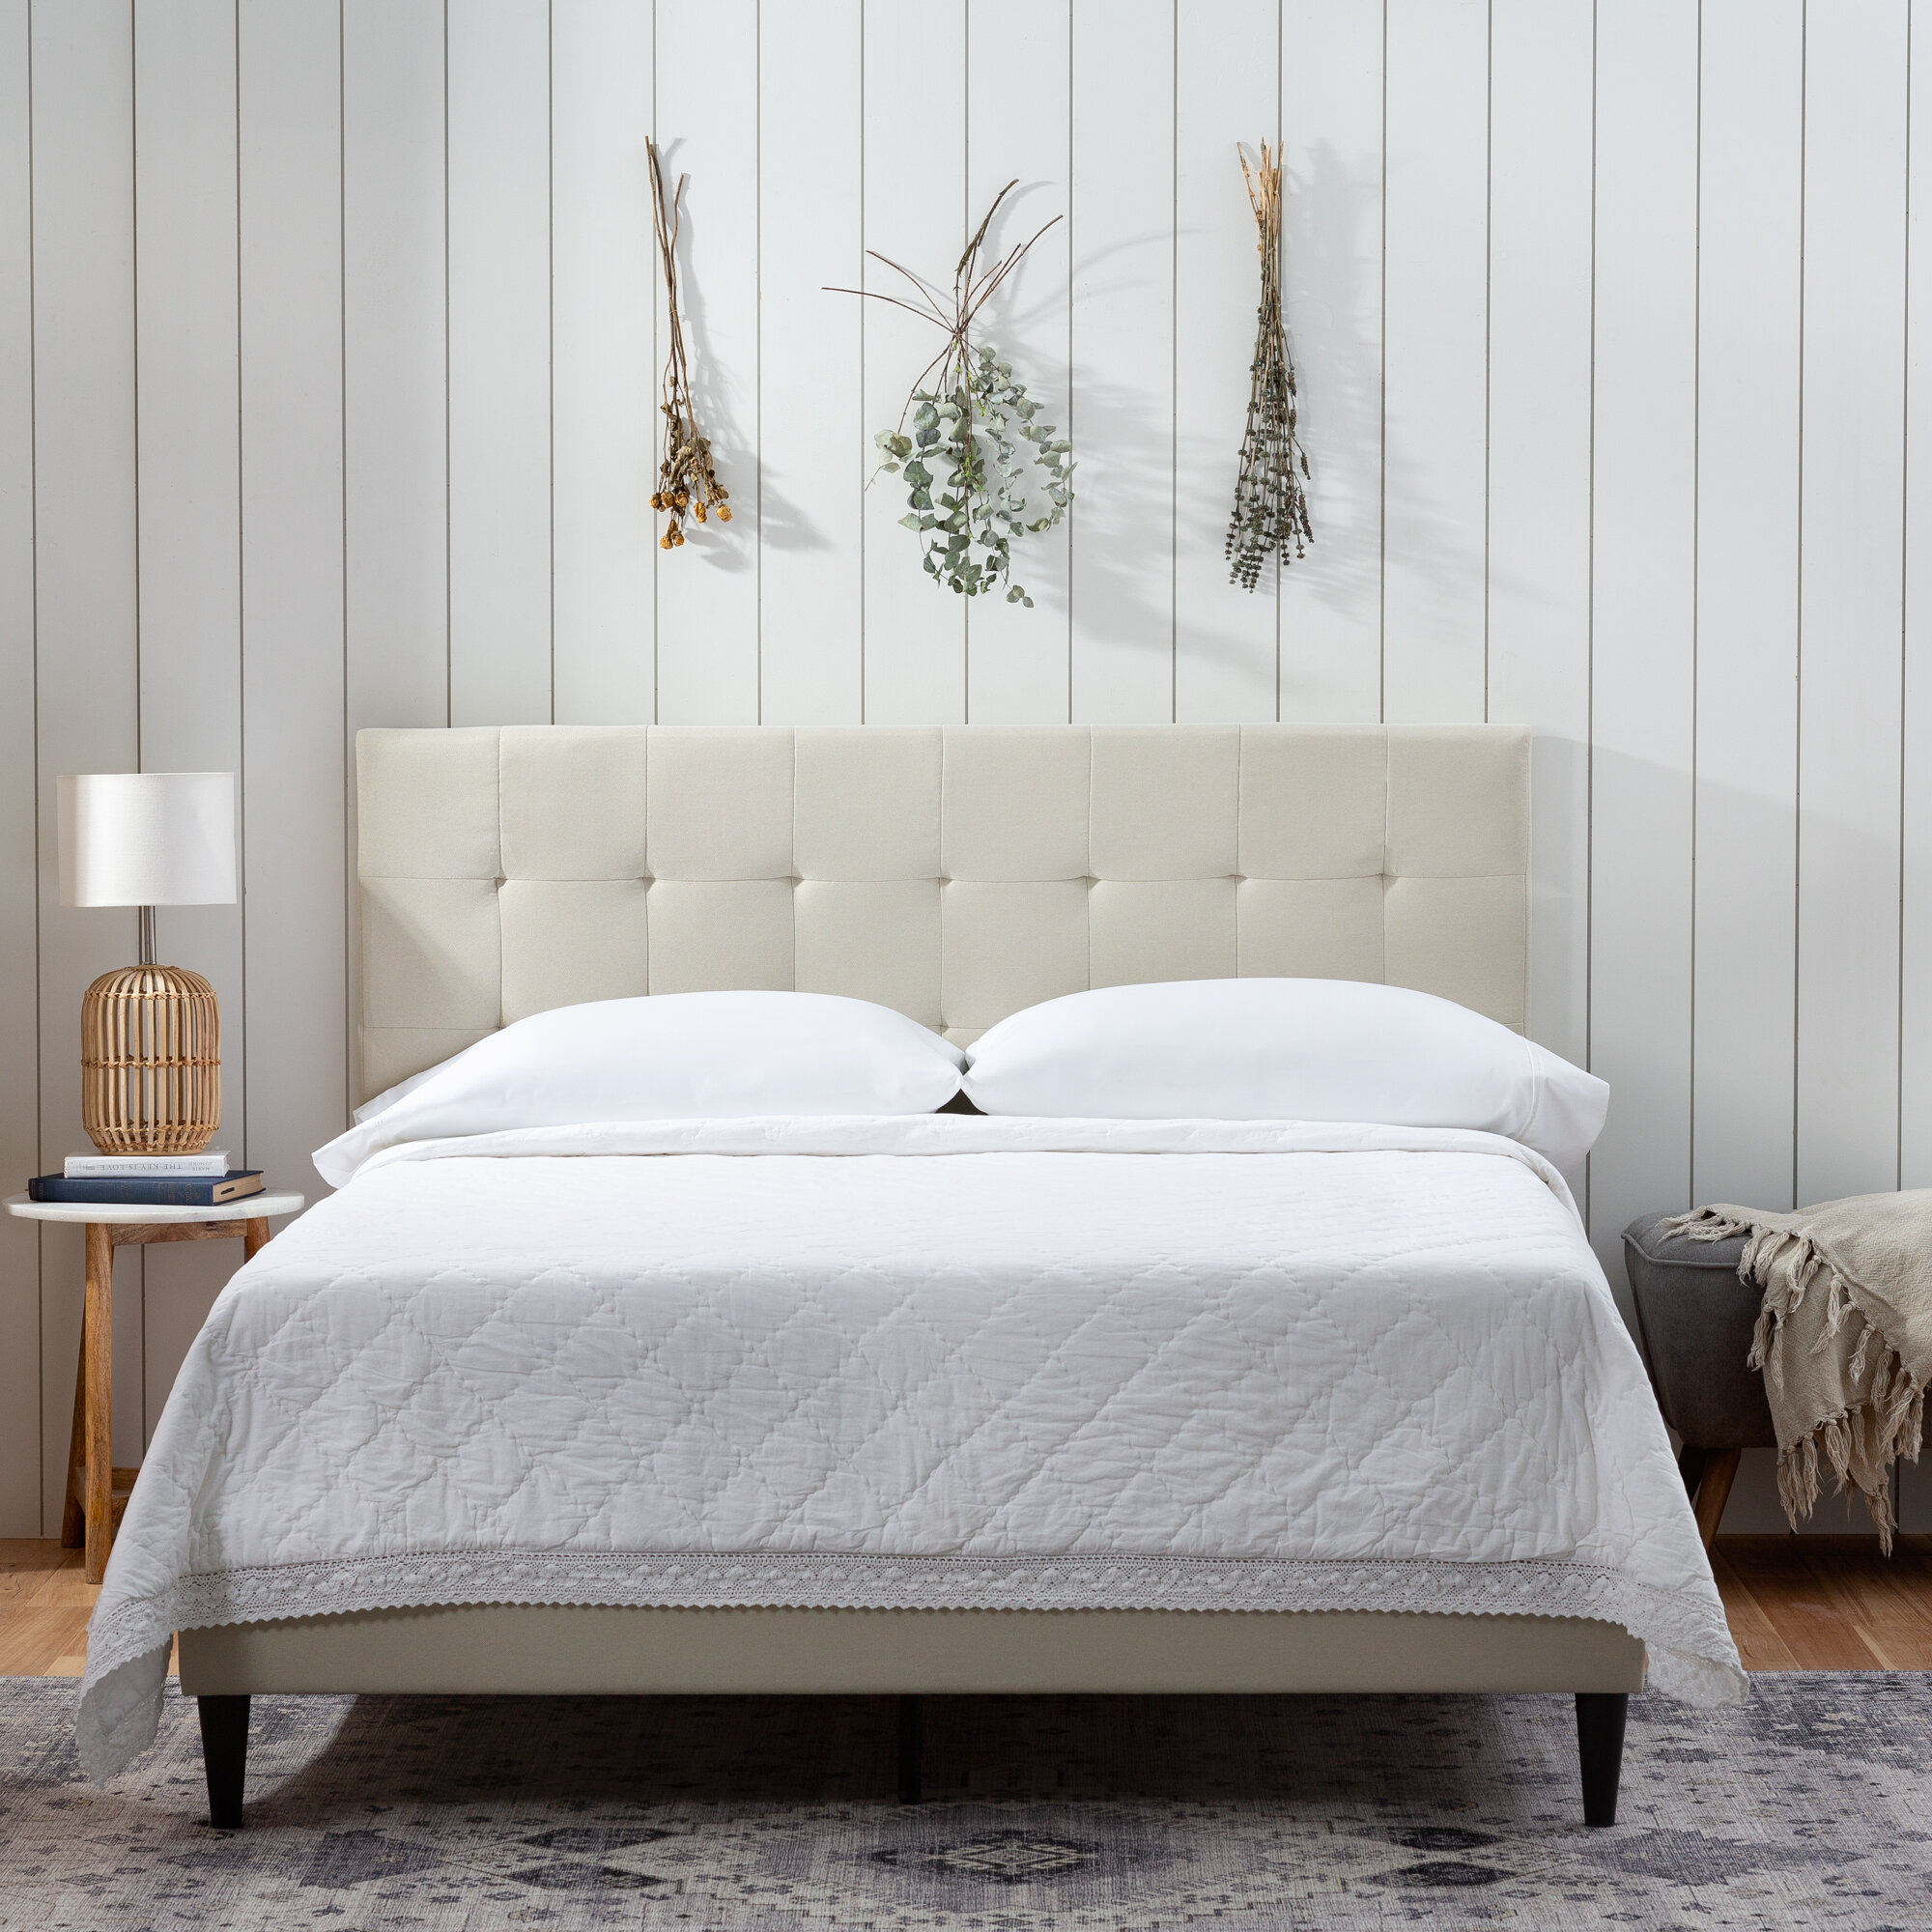 Full/Queen King Beige Platform Bed Frame with Wooden Slats and Nailhead Decro 